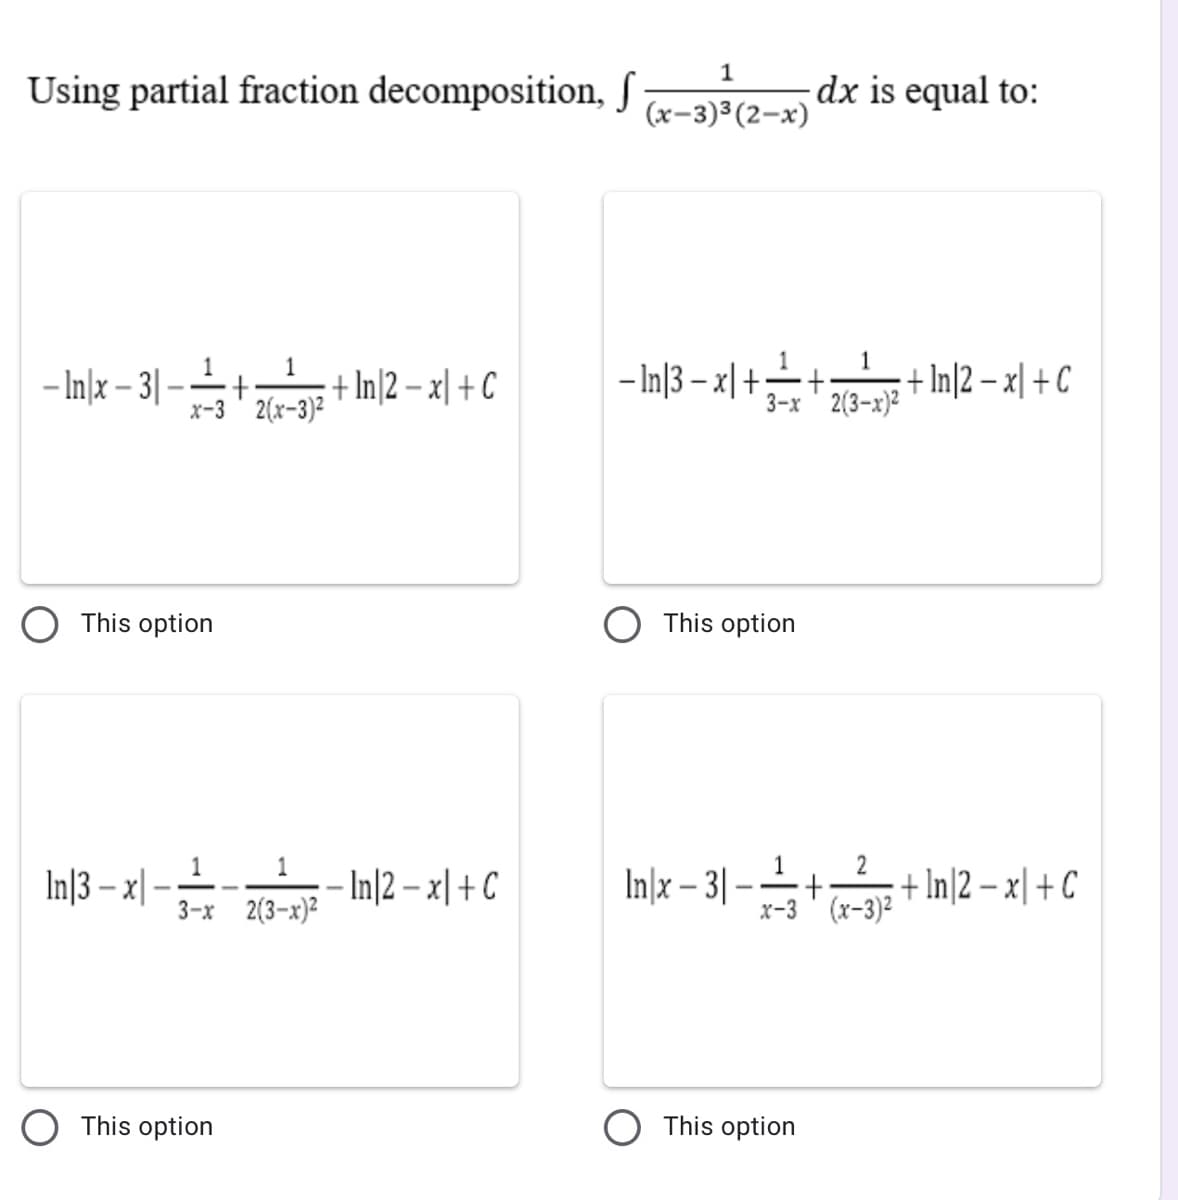 1
Using partial fraction decomposition, S
dx is equal to:
(x-3)³(2-x)
1
1
-Iln13-지+근++ In]2 - x + C
1
1
-Inx-3|-공++ In2 - 지 +C
x-3' 2(x-3)²
+ In\2 – x| + C
3-x ' 2(3-x)2
This option
O This option
In|3 – x|
1 1
In[x – 3|
1
:+ In|2 – x| + C
3-x 2(3-x)E In|2 – x|+C
x-3' (x-3)2
3-х 2(3-х)2
This option
This option
